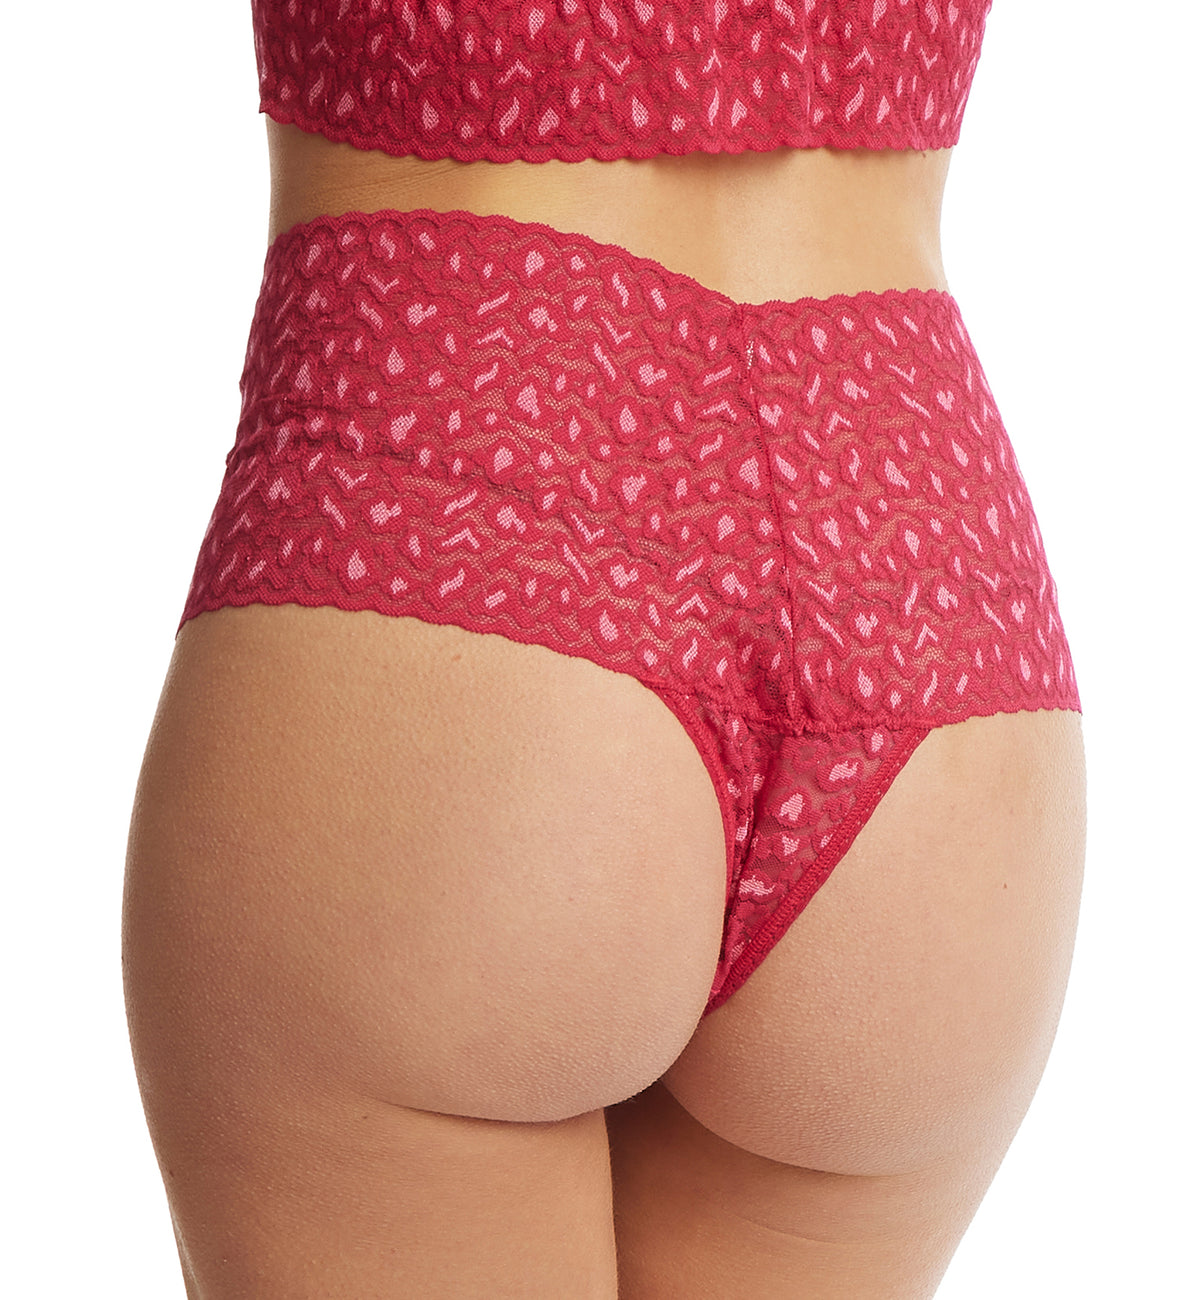 Hanky Panky Cross Dyed Leopard High-Waist Retro Thong (7J1921),Berry Sangria/Pink - Berry Sangria/Pink,One Size